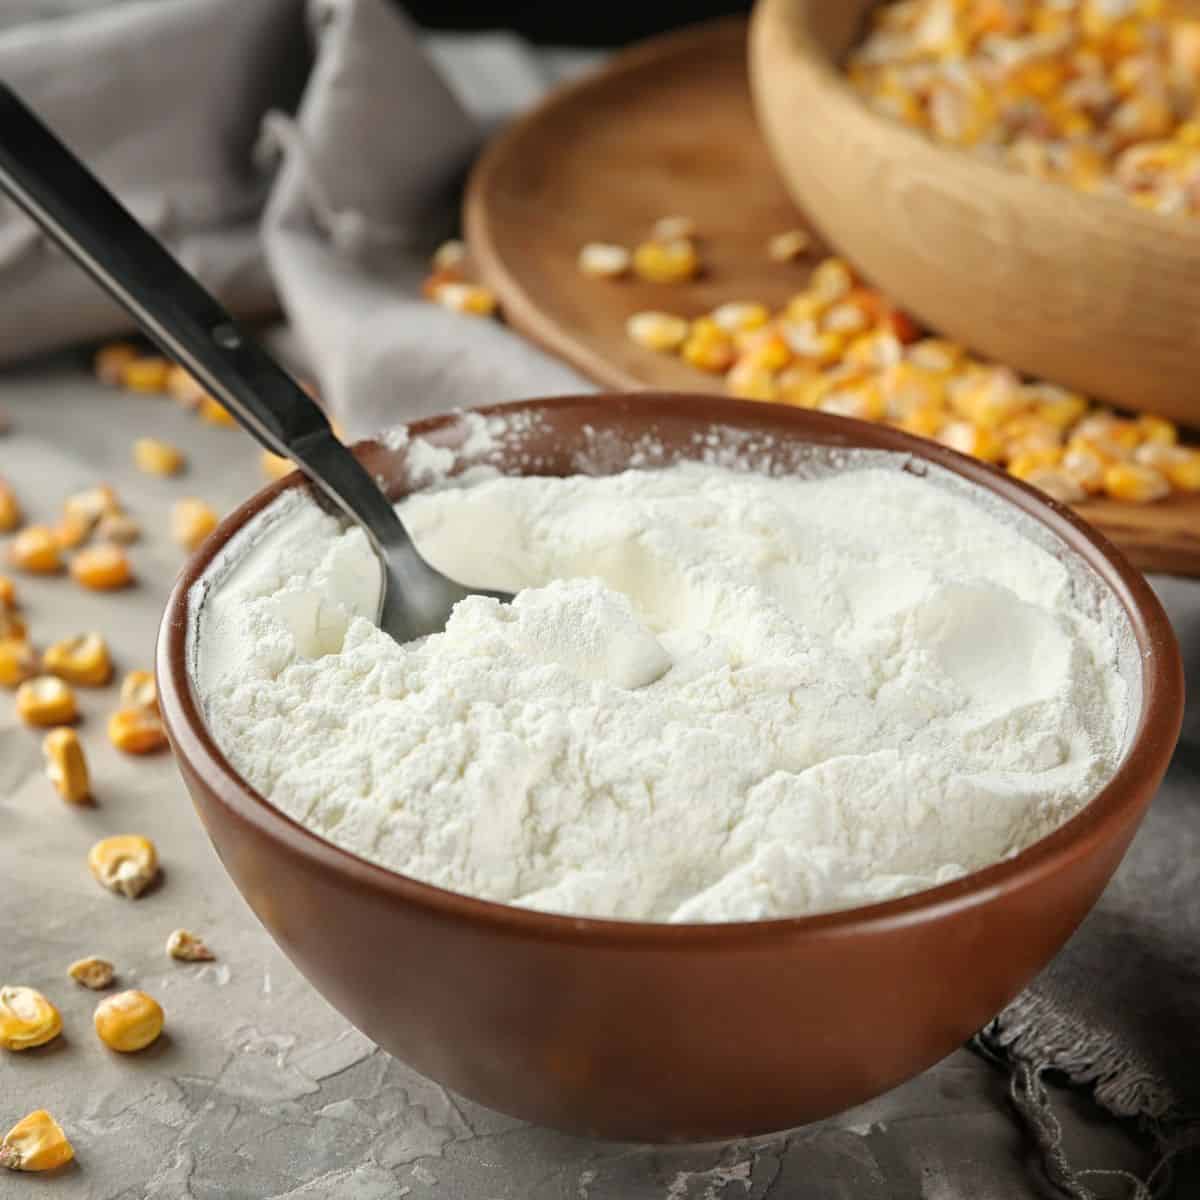 How To Store Cornstarch Long-Term